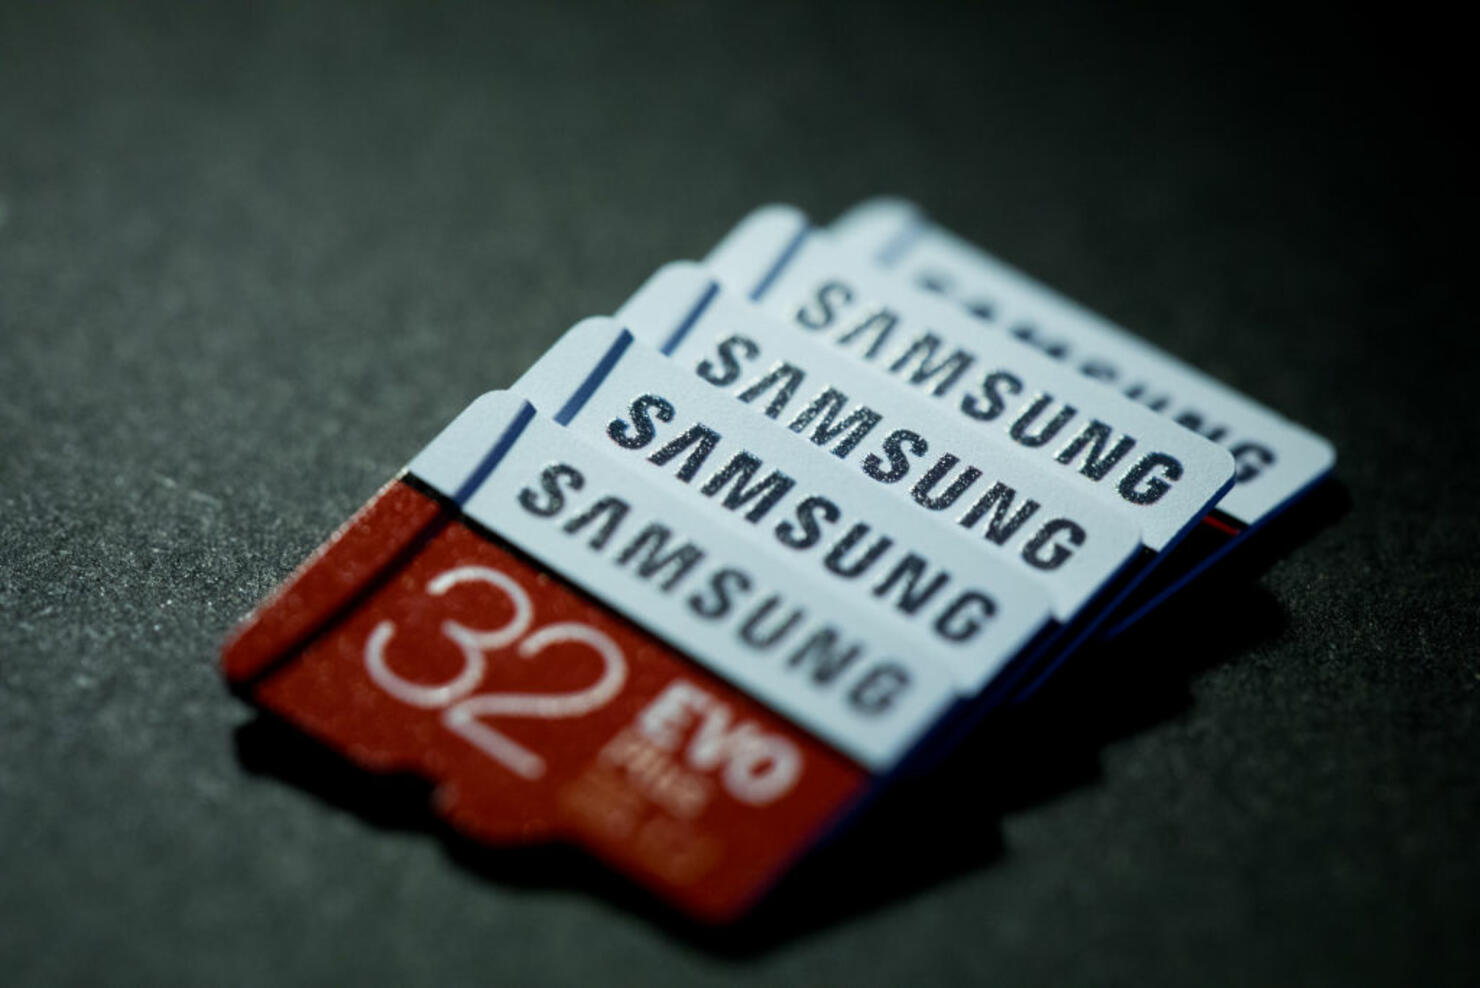 Samsung MicroSD Cards And Memory Modules Ahead of Results